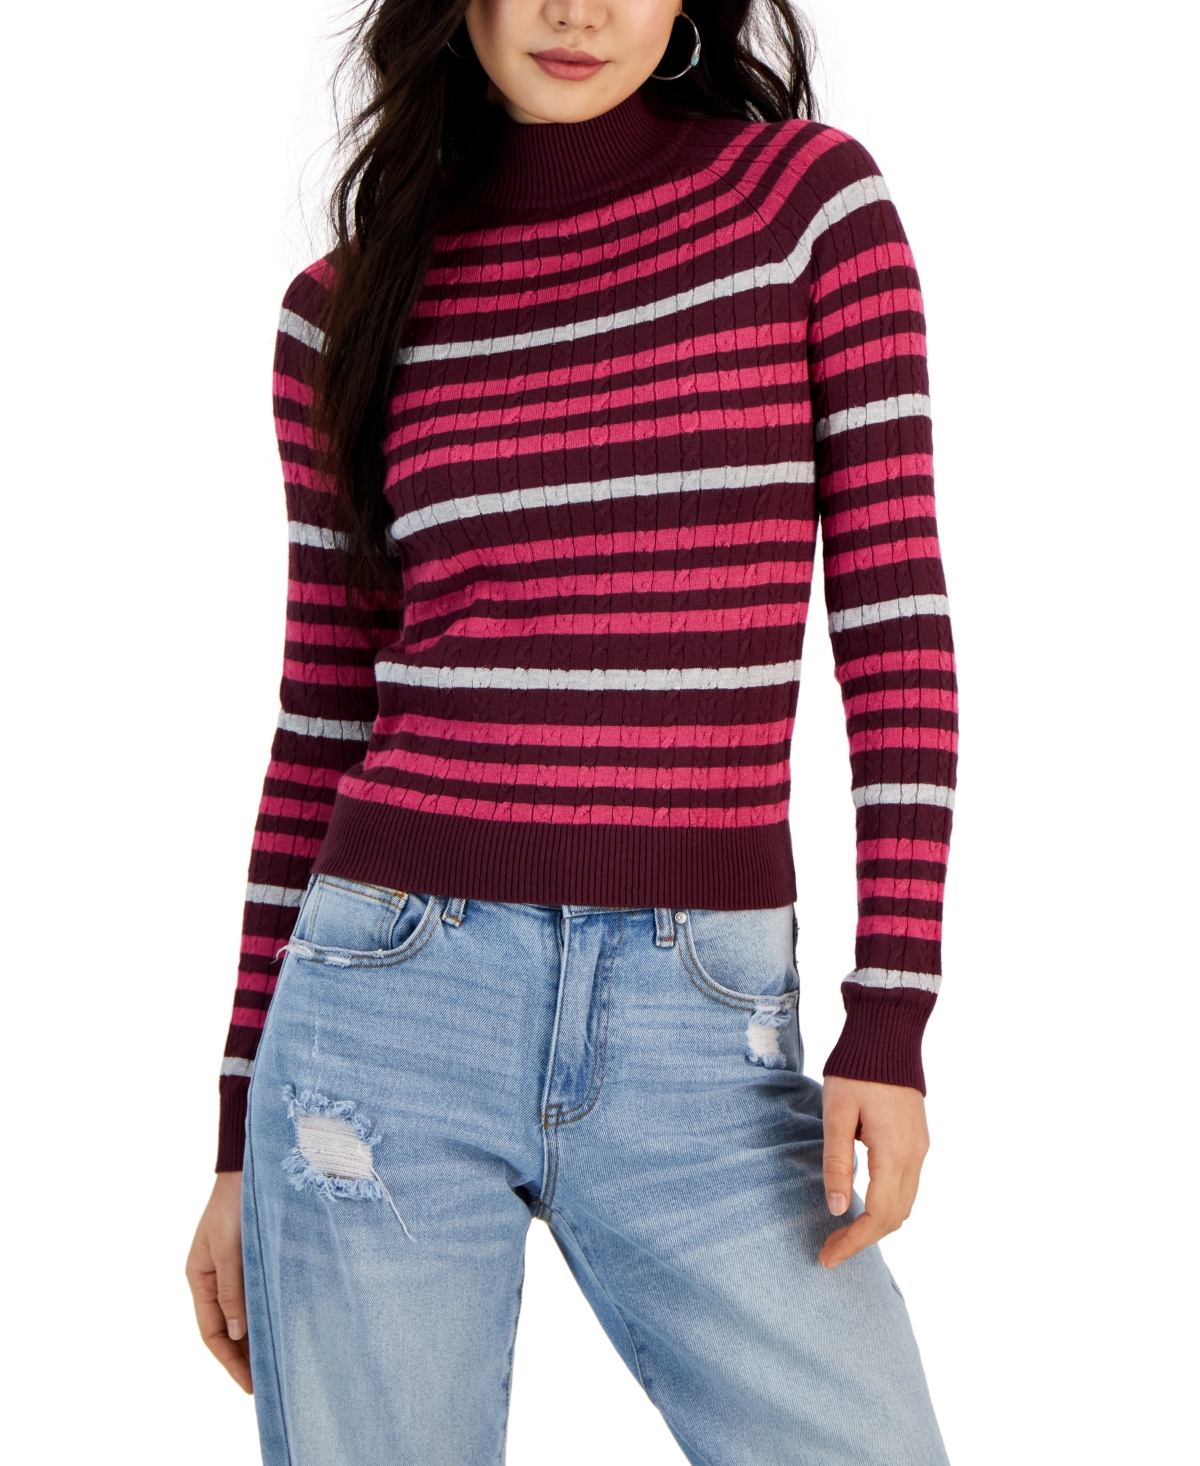 Hooked Up By Iot Juniors' Striped Mini-cable Mock Neck Sweater In Brown Plum Combo